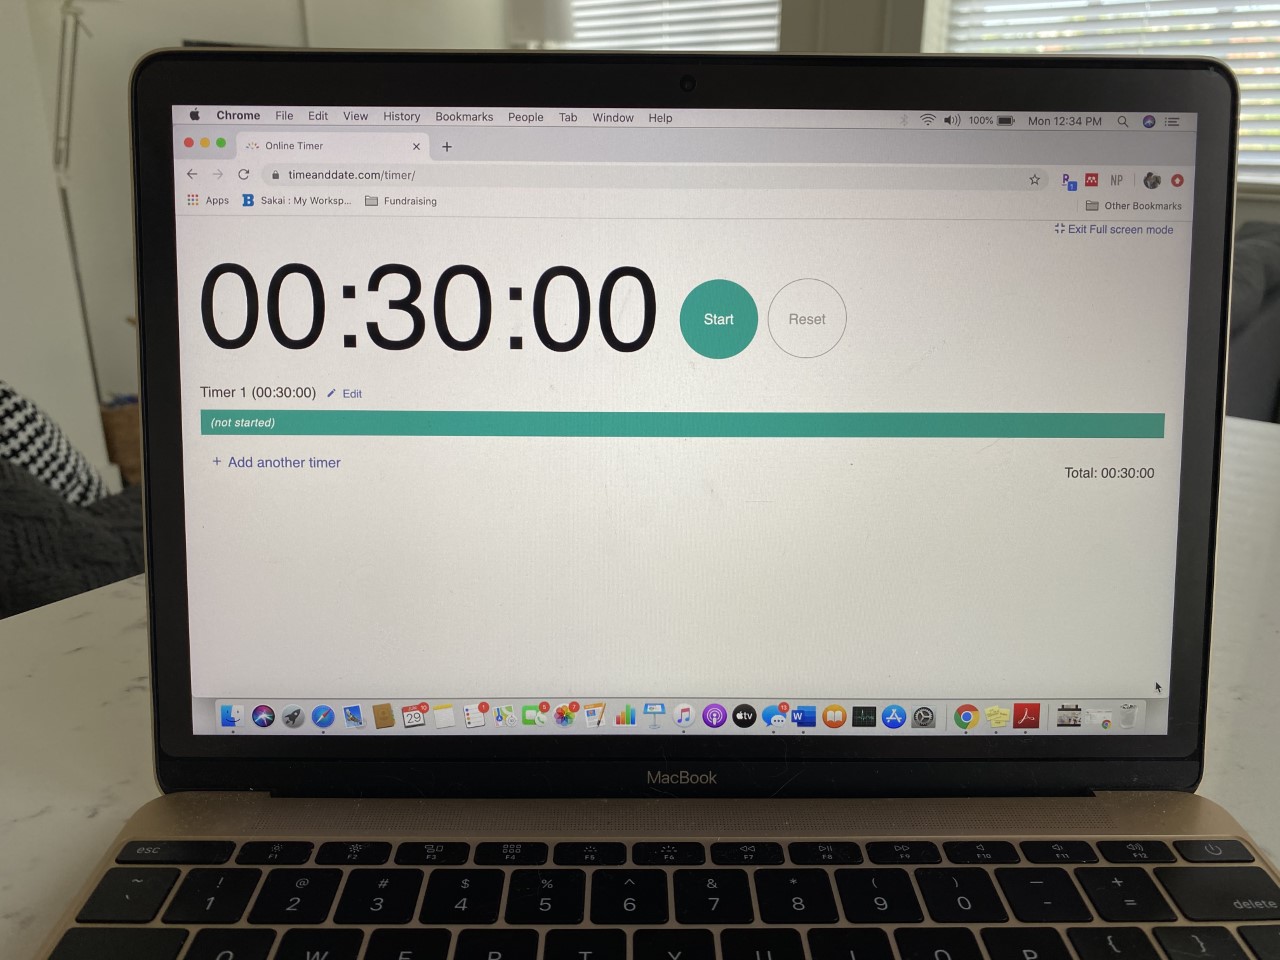 Set your timer to 30 minutes